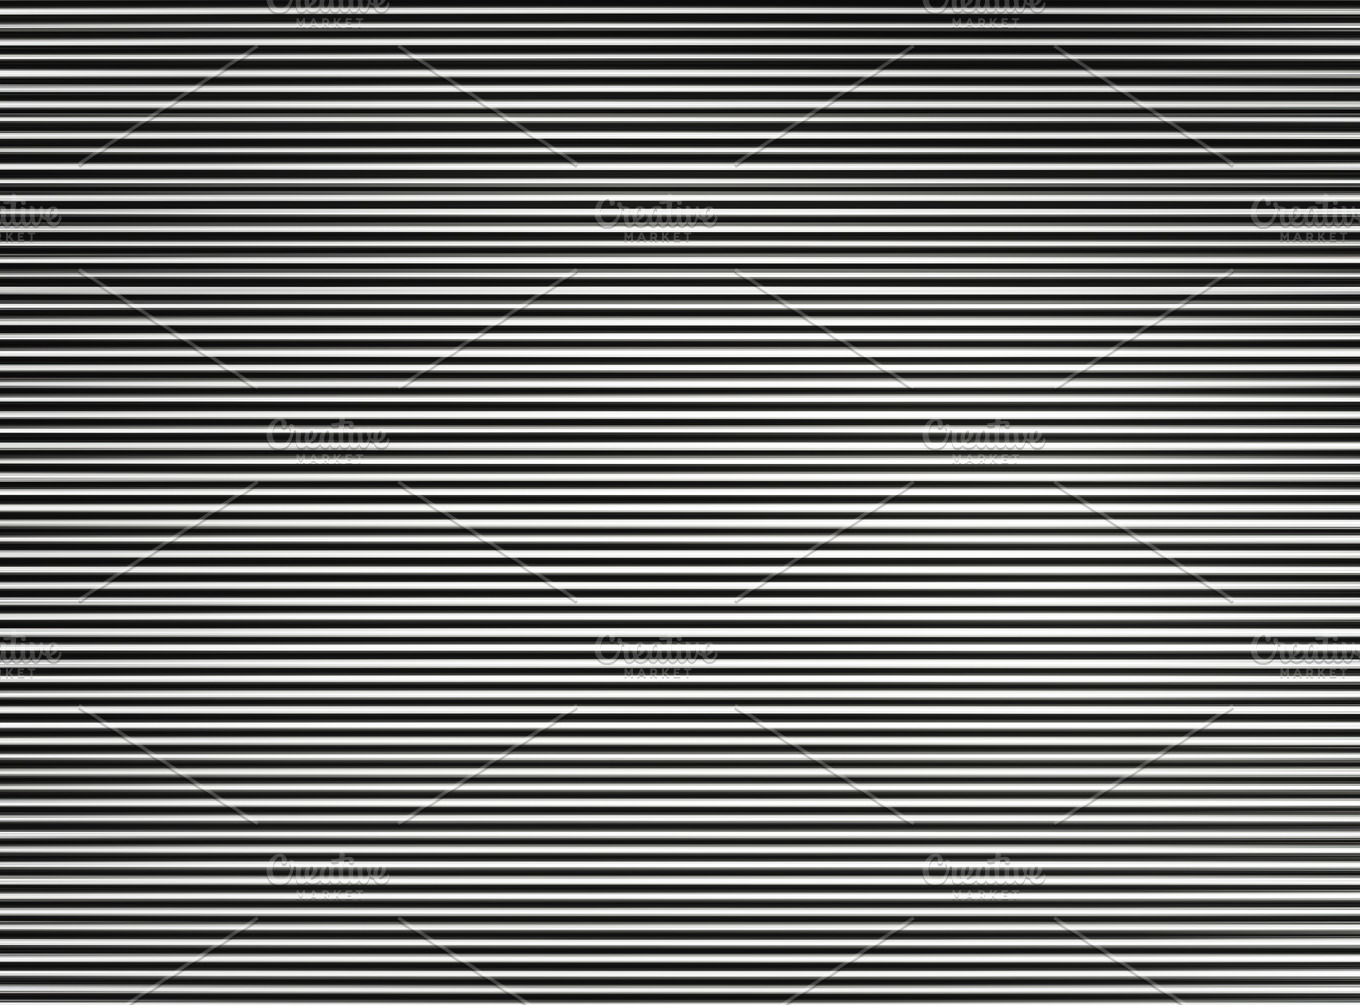 Horizontal black and white interlaced tv lines abstraction backg